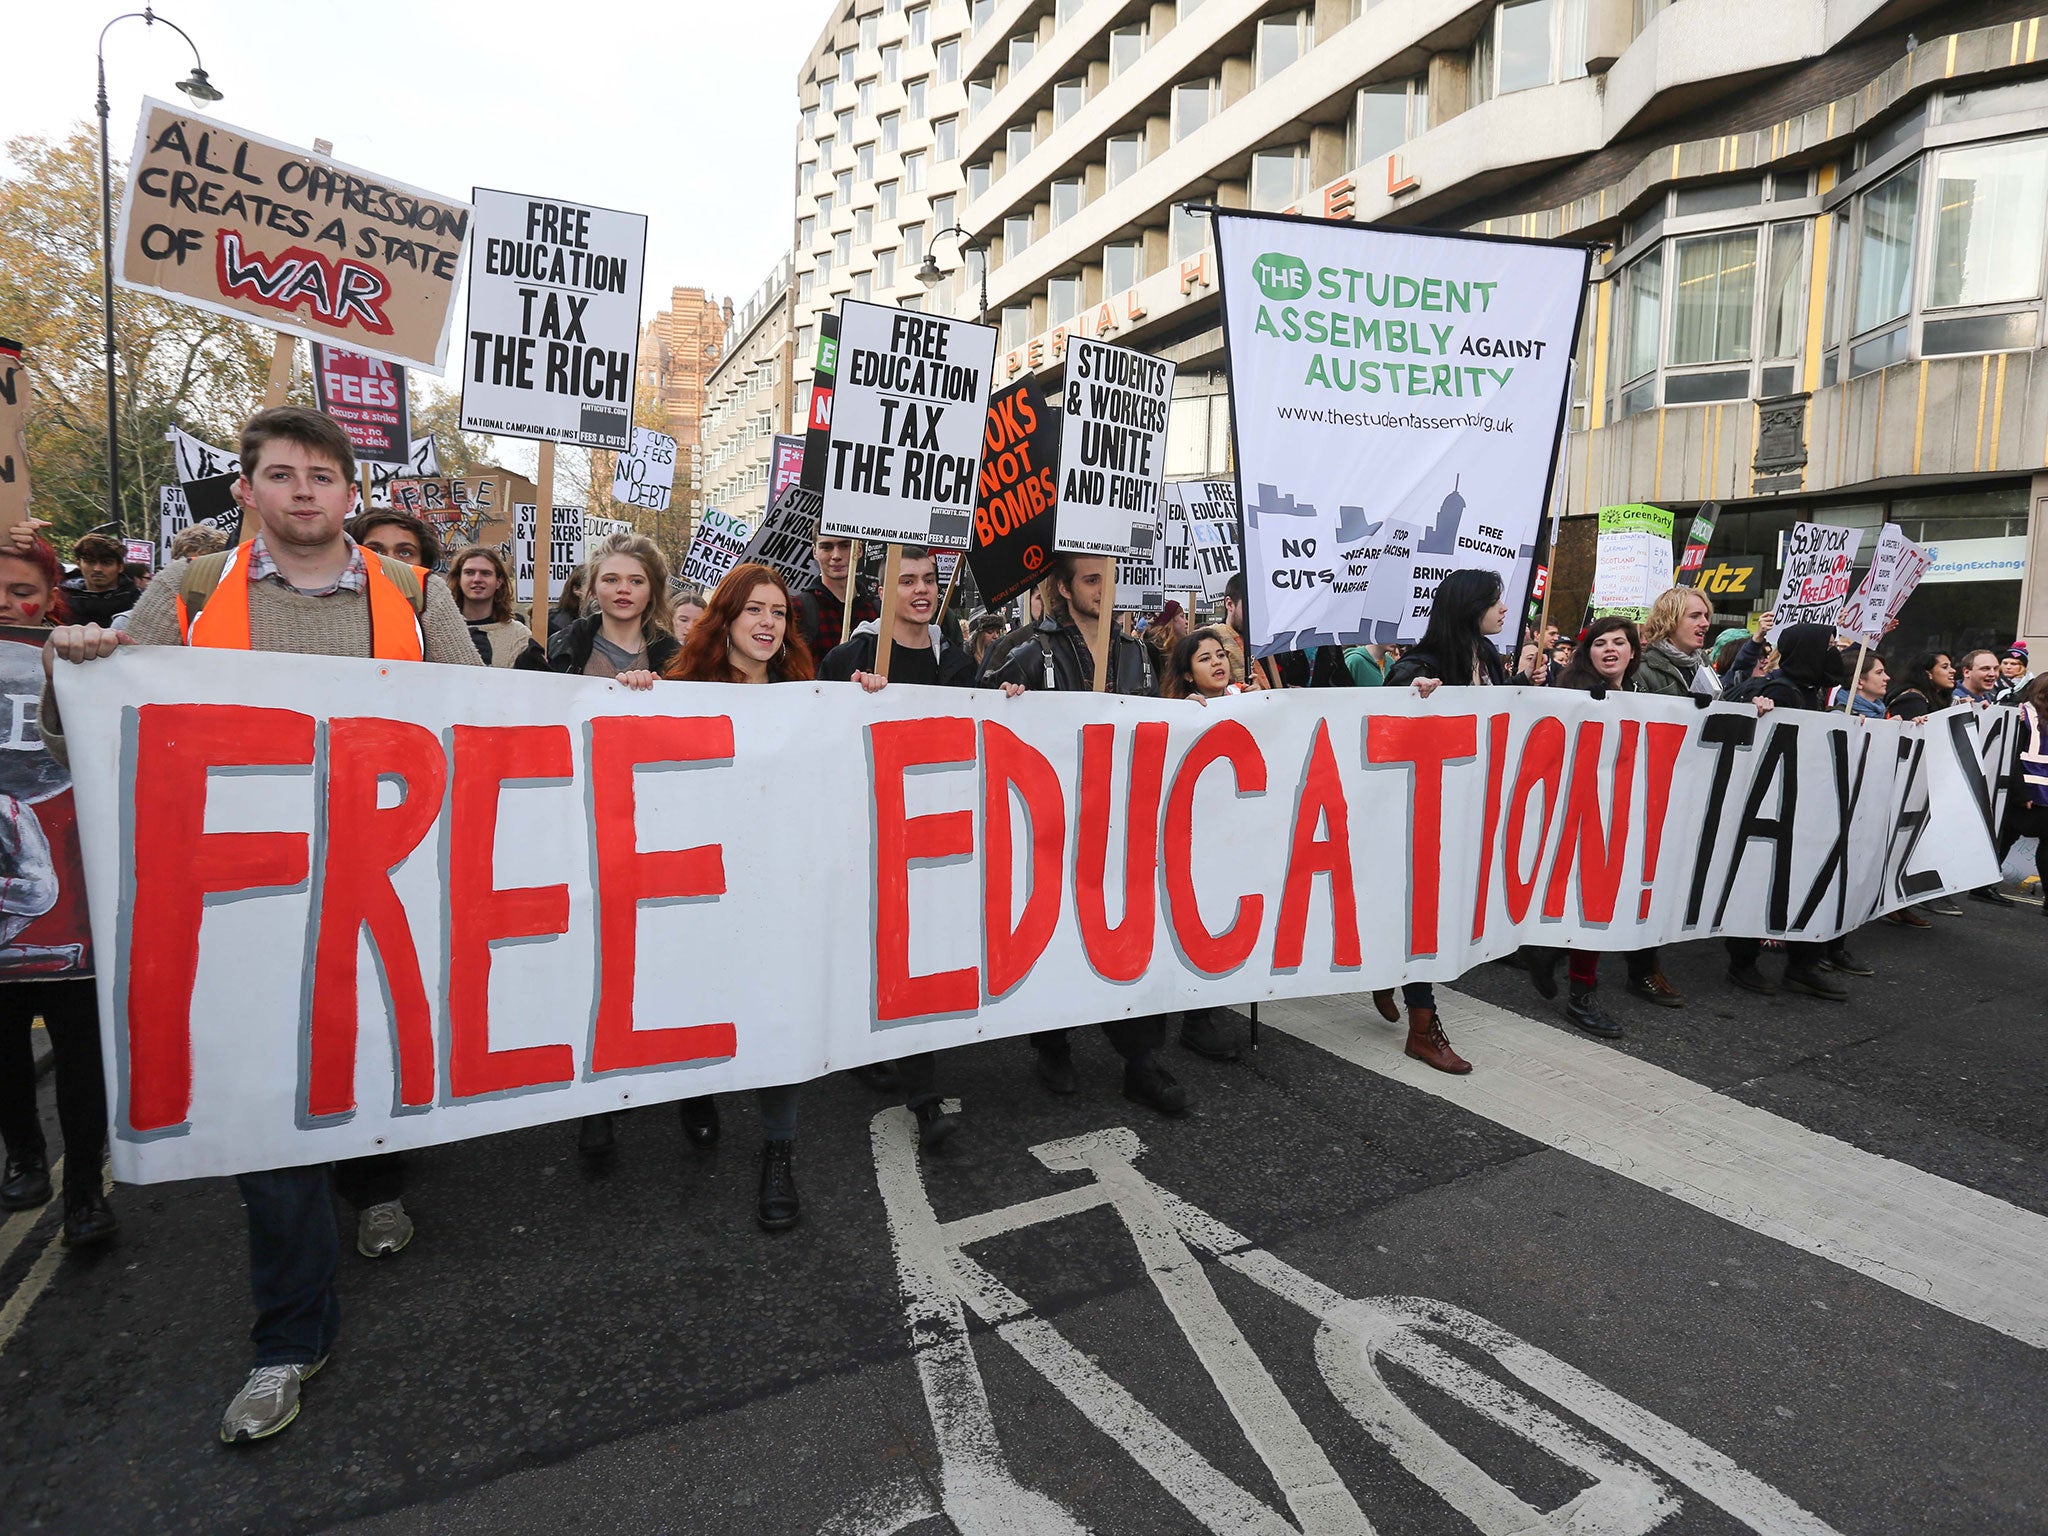 Tensions have been increasing across parts of the UK as students continue to protest against the rising cost of higher education